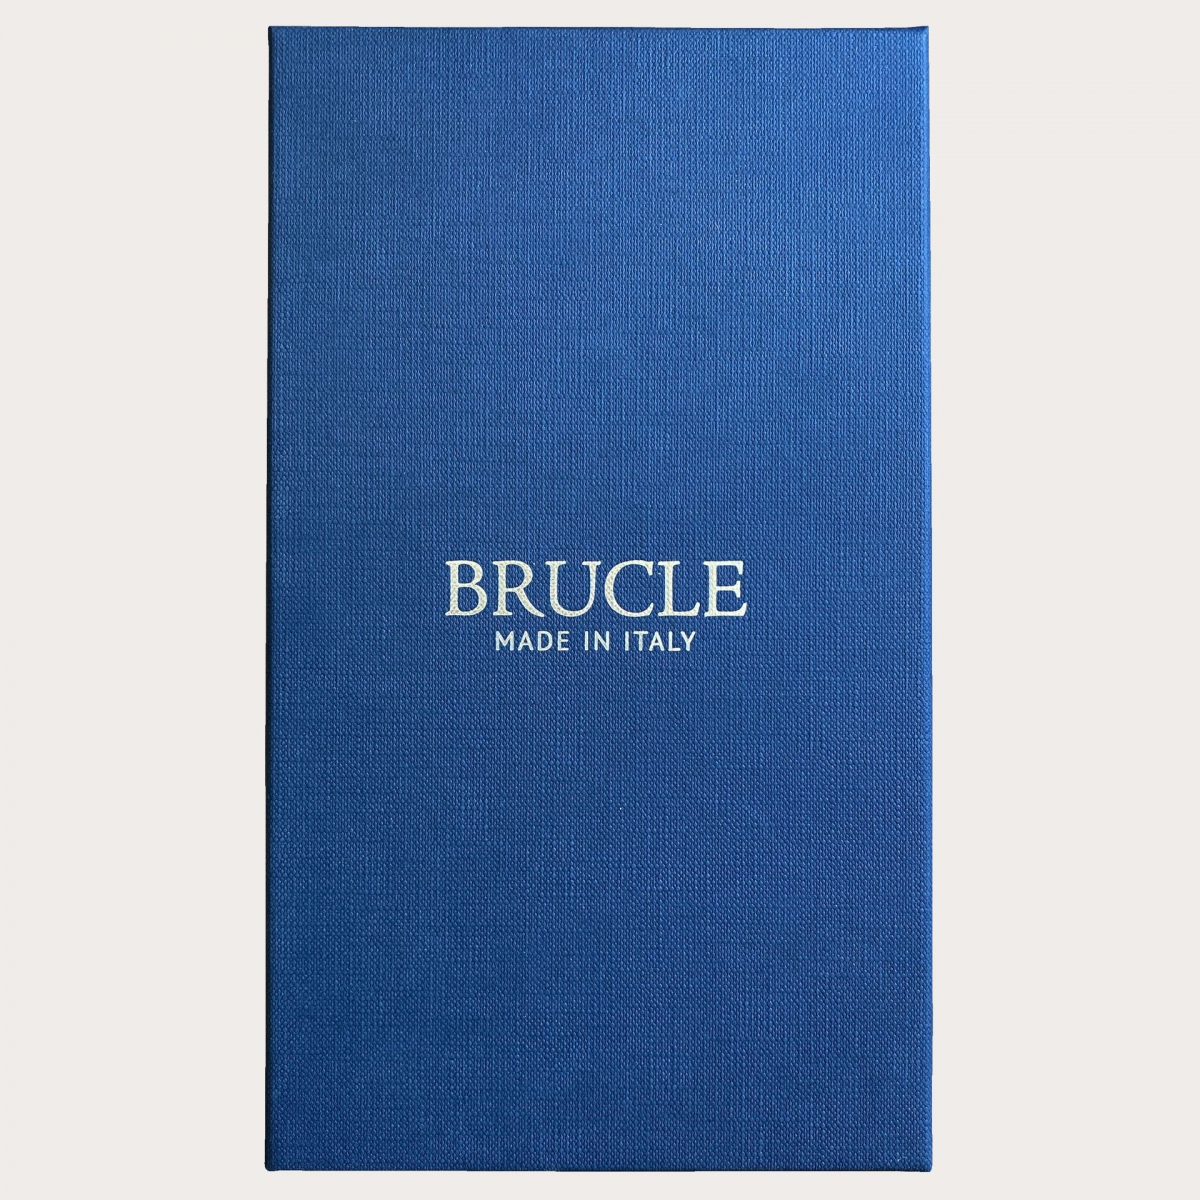 BRUCLE Thin X-shaped braces for children and teenagers, blue and light blue